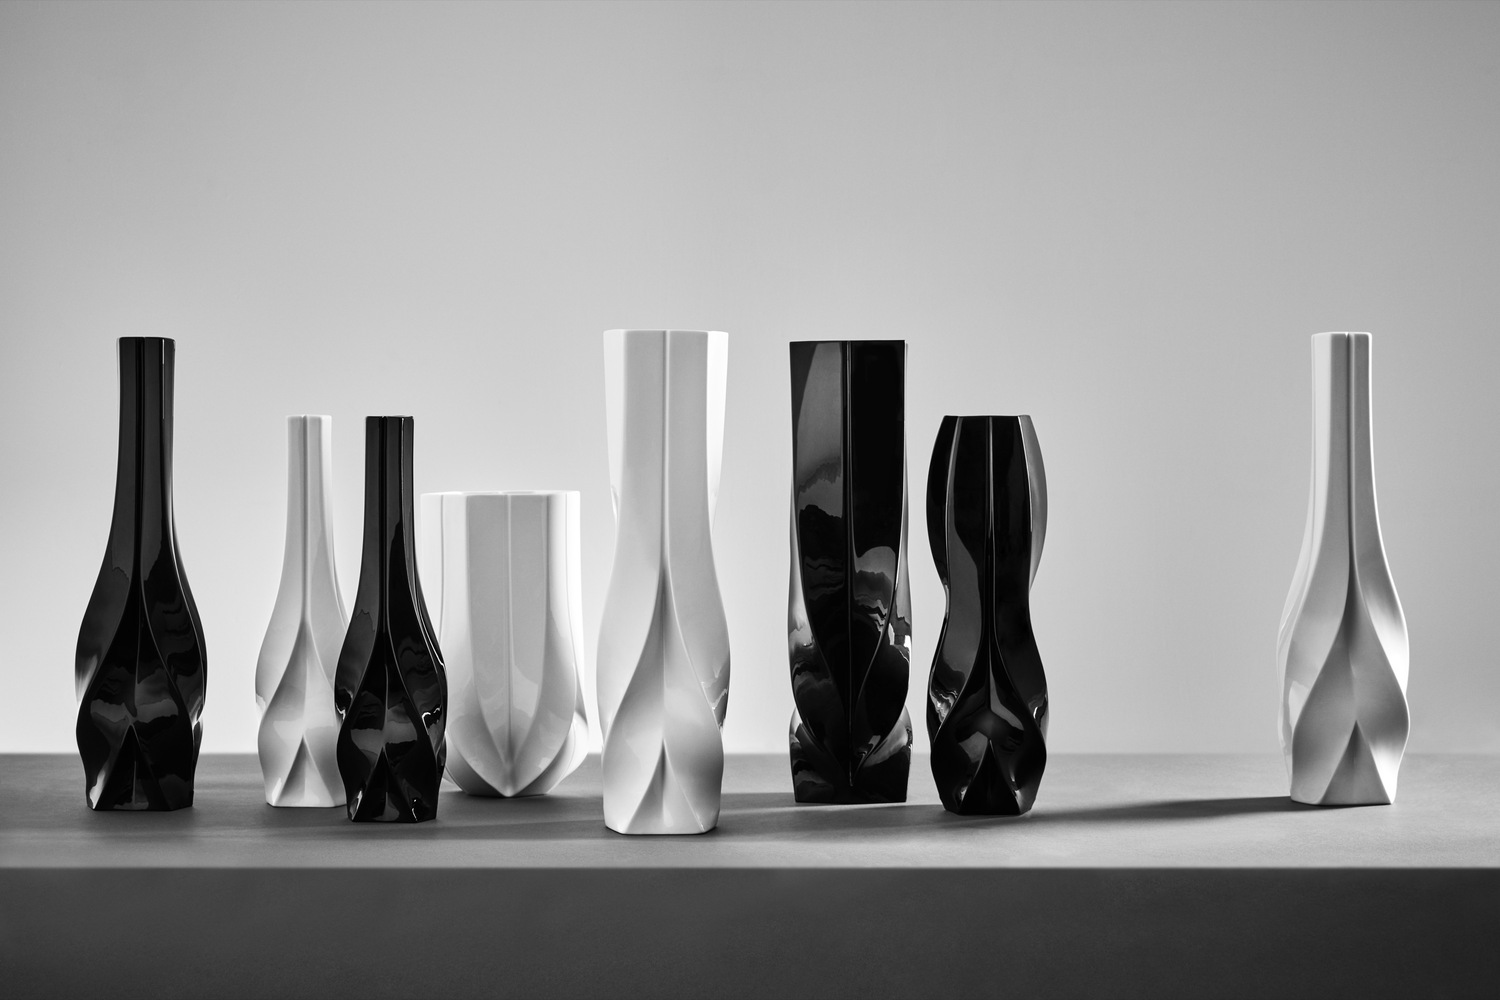 Sculptural vases featured in Zaha Hadid Design's new kitchenware collection.